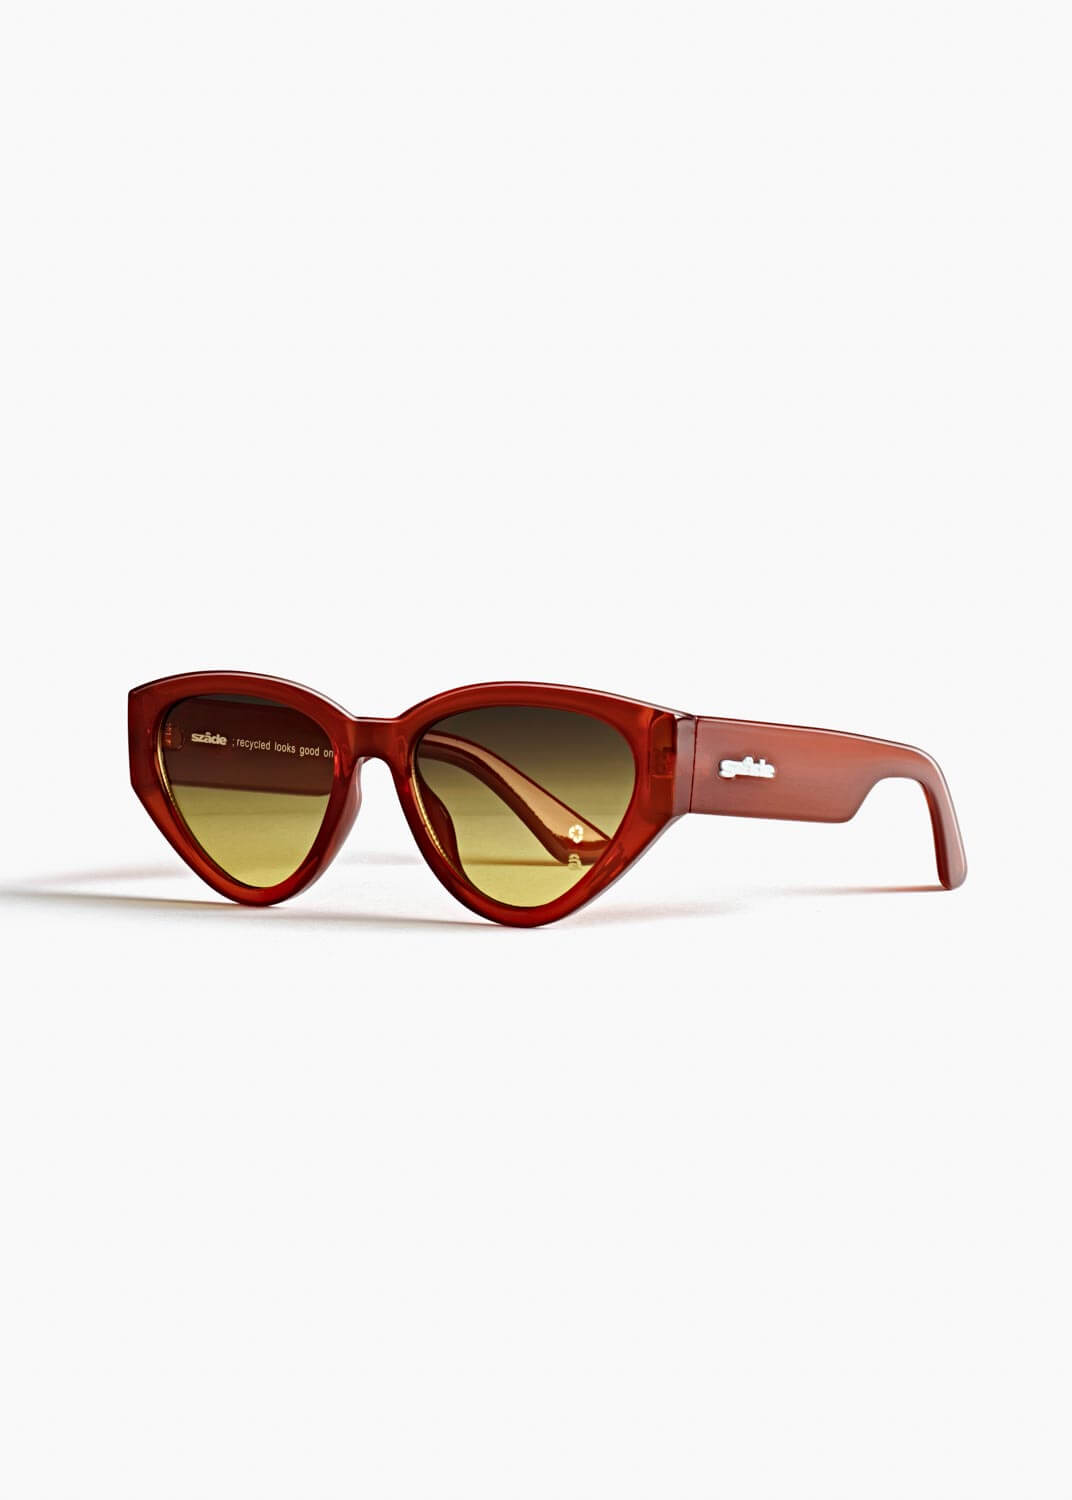 Szade RECYCLED SUNGLASSES  Szade - Kershaw in Blood Plum/Unmellow Yellow